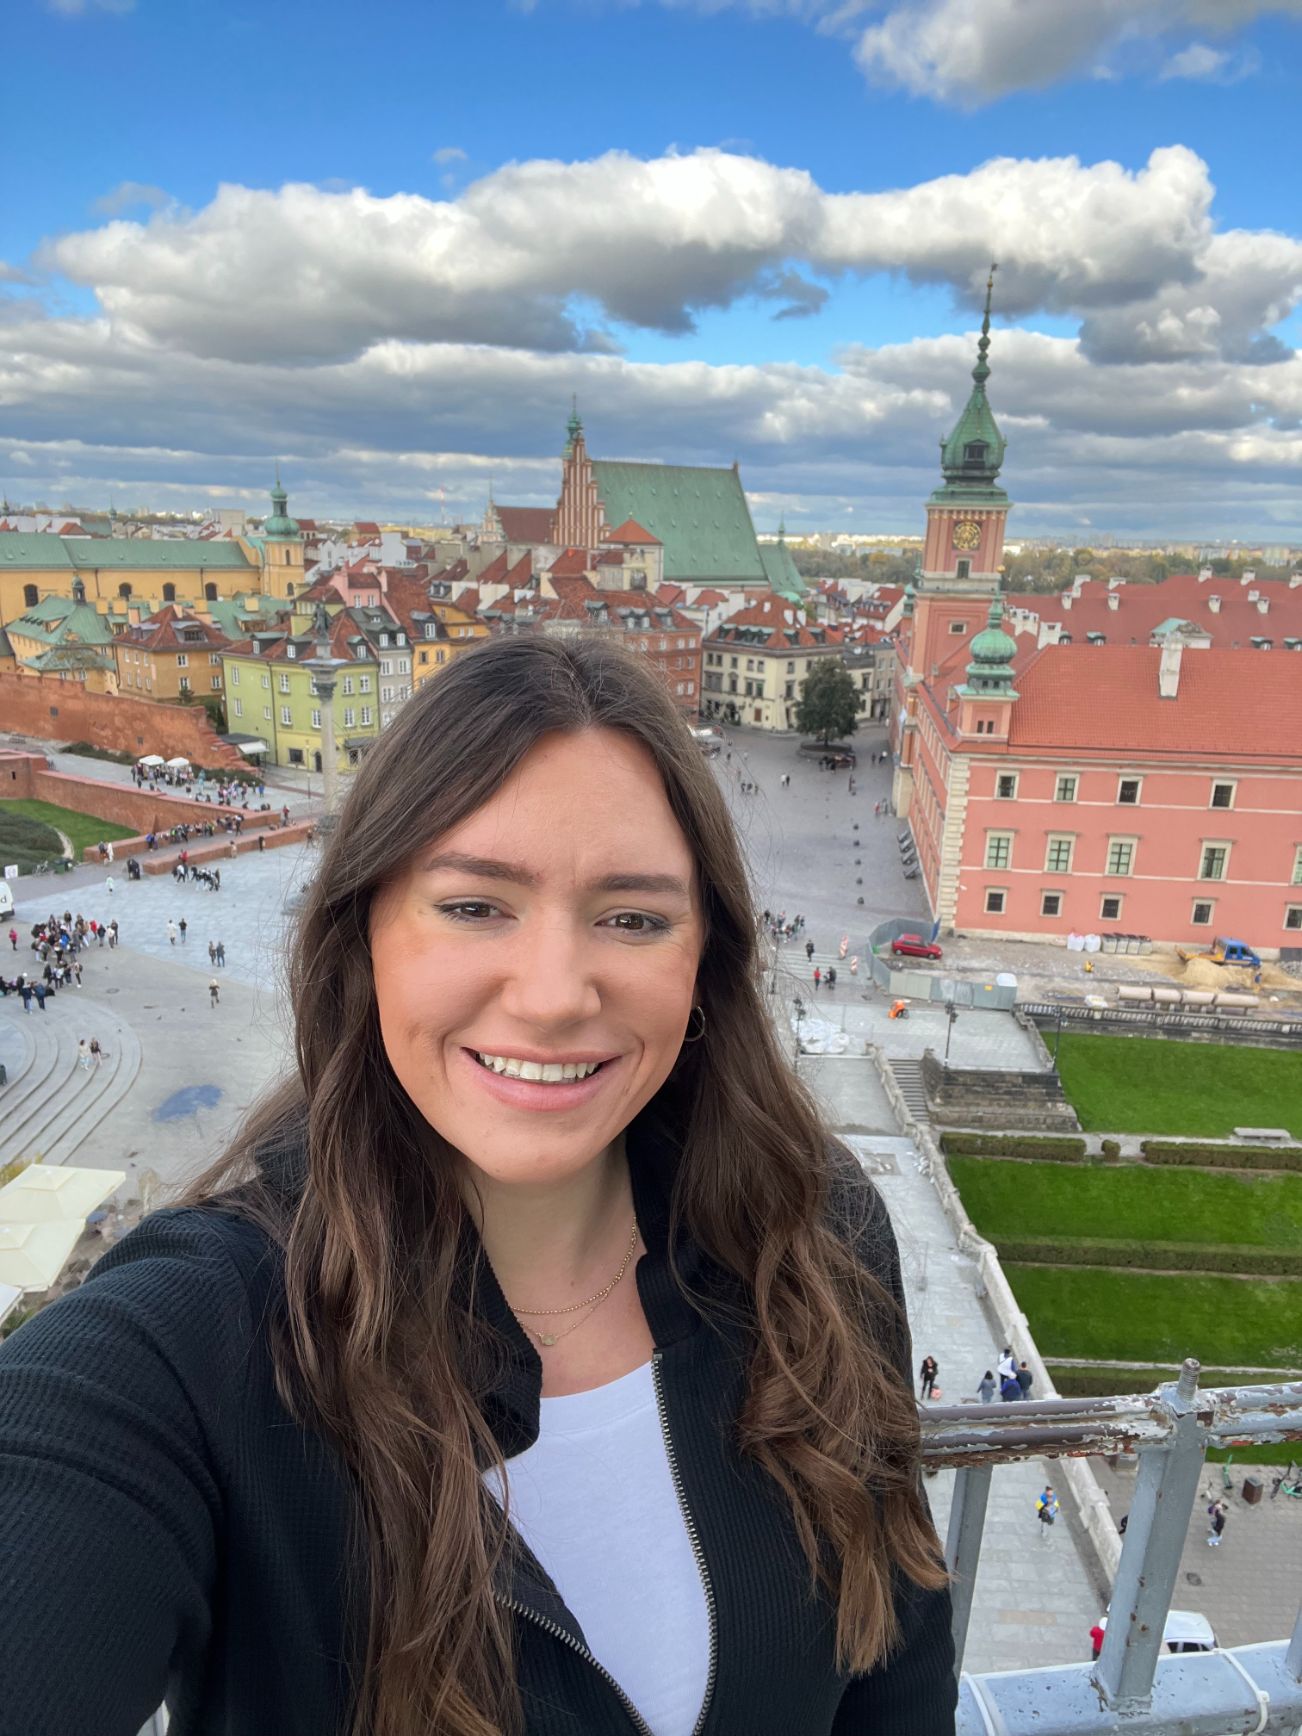 rachel takes selfie with royal castle square warsaw